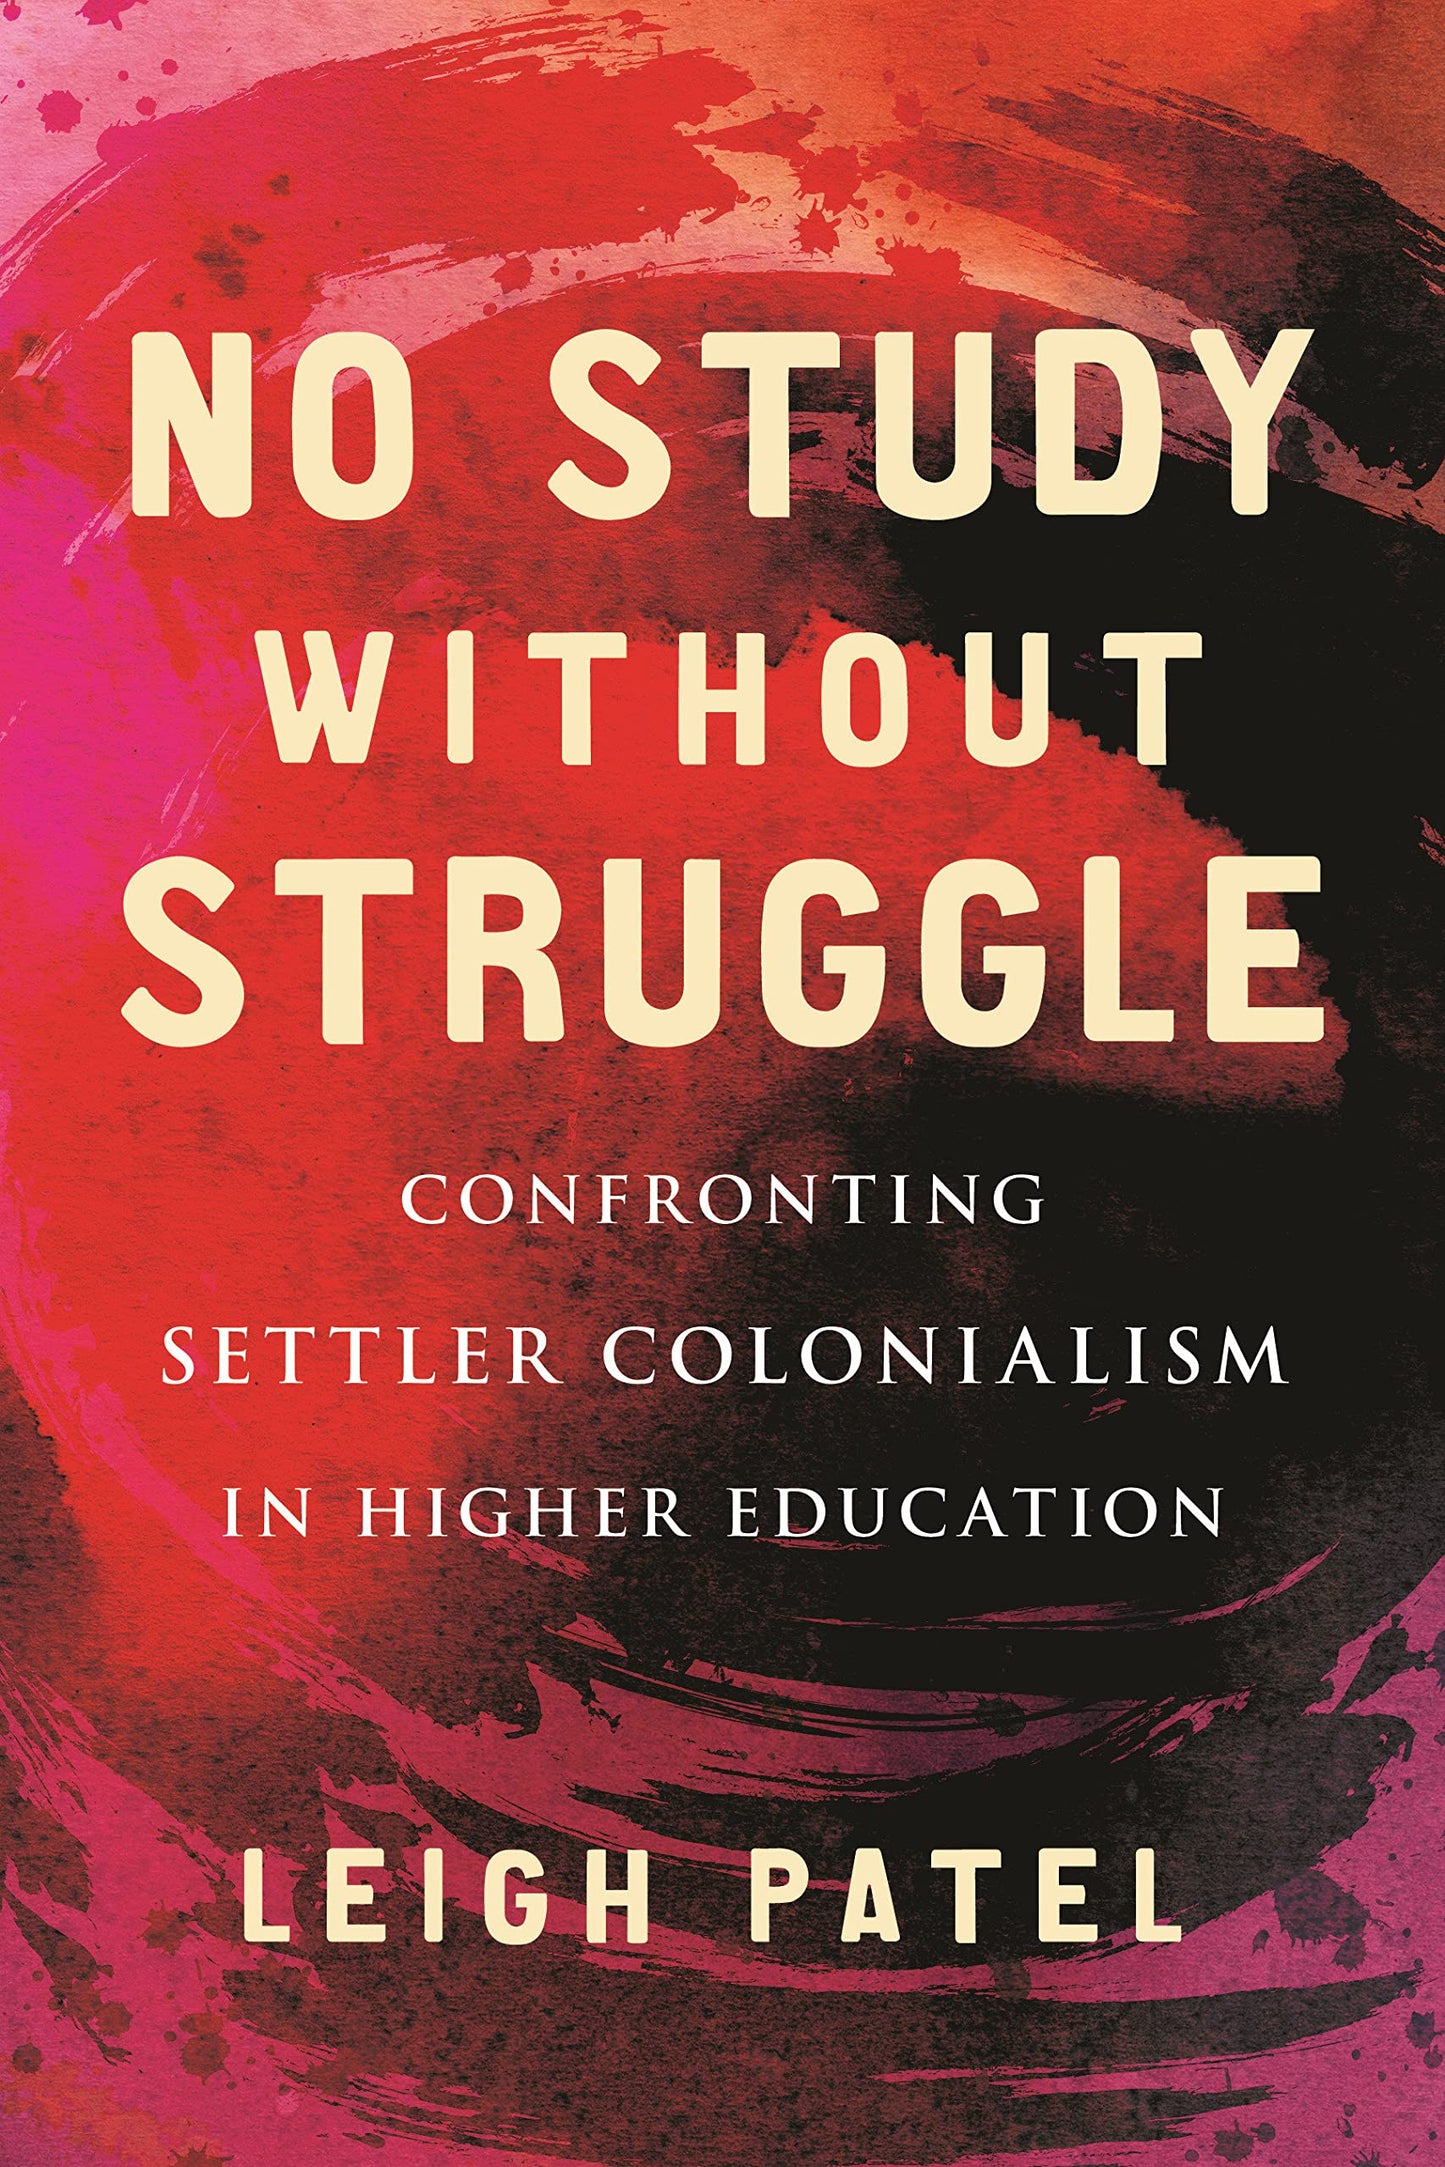 No Study Without Struggle, by Leigh Patel